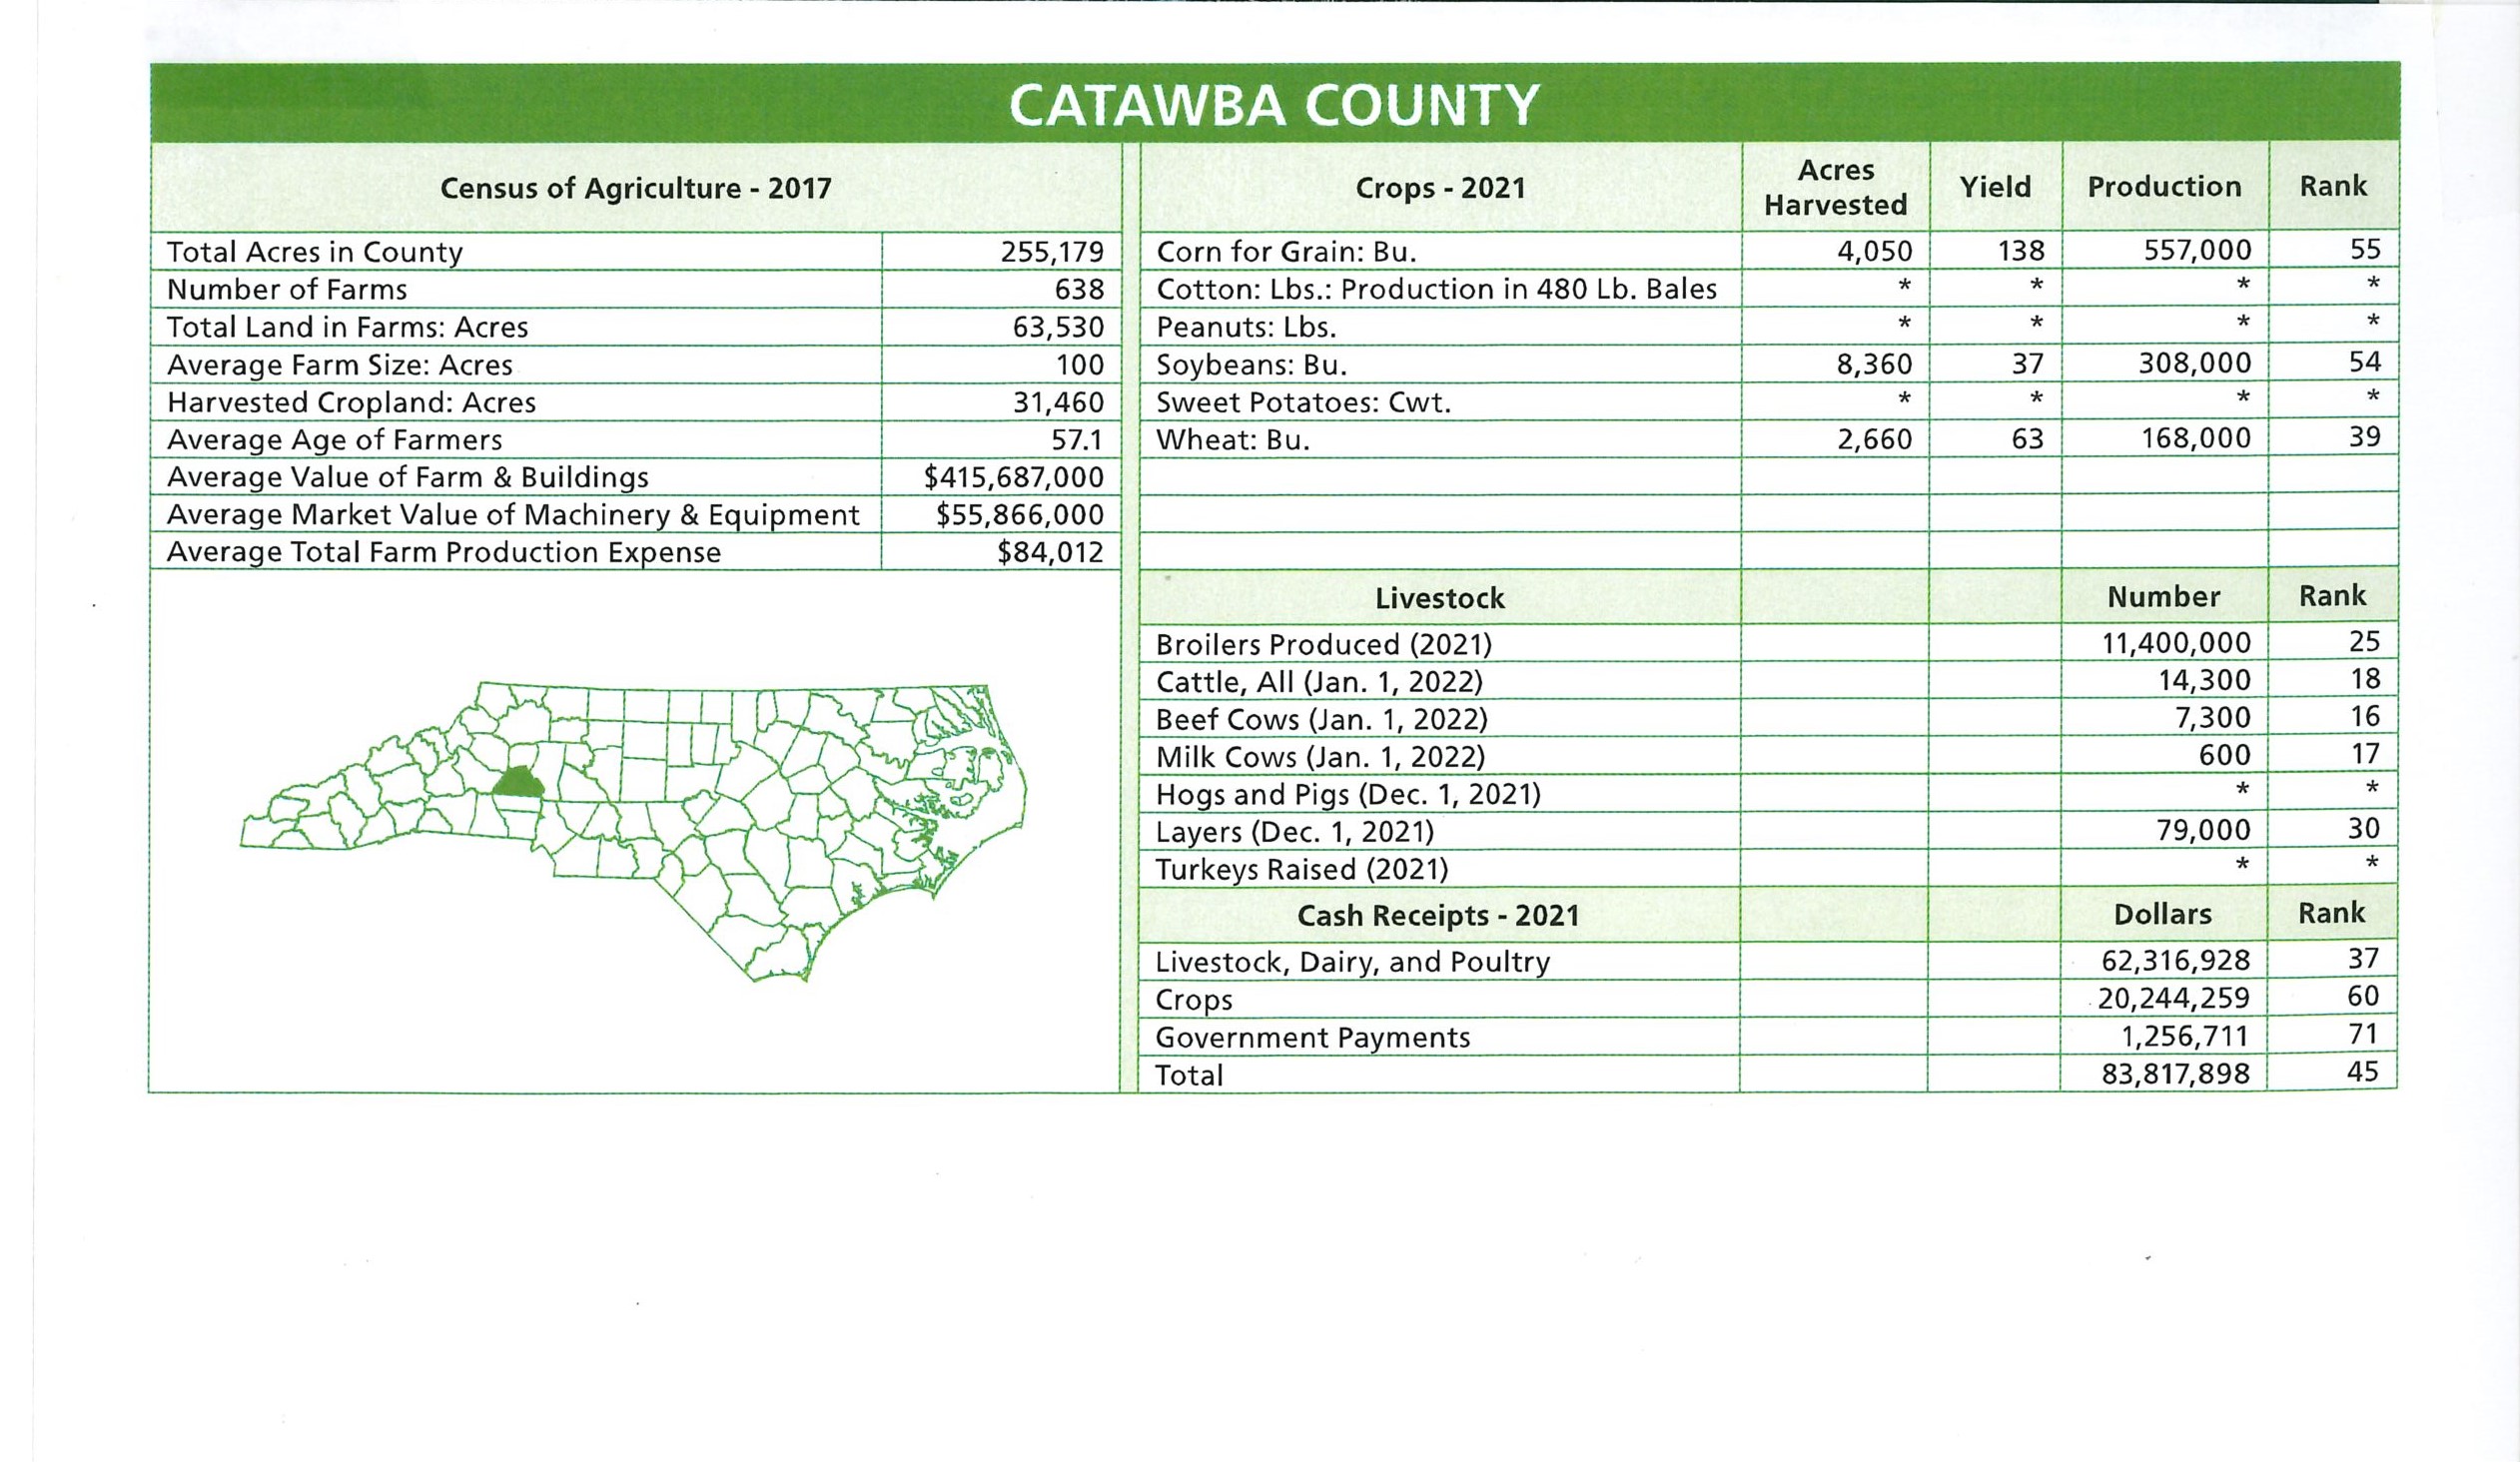 Catawba County Census of Agriculture information